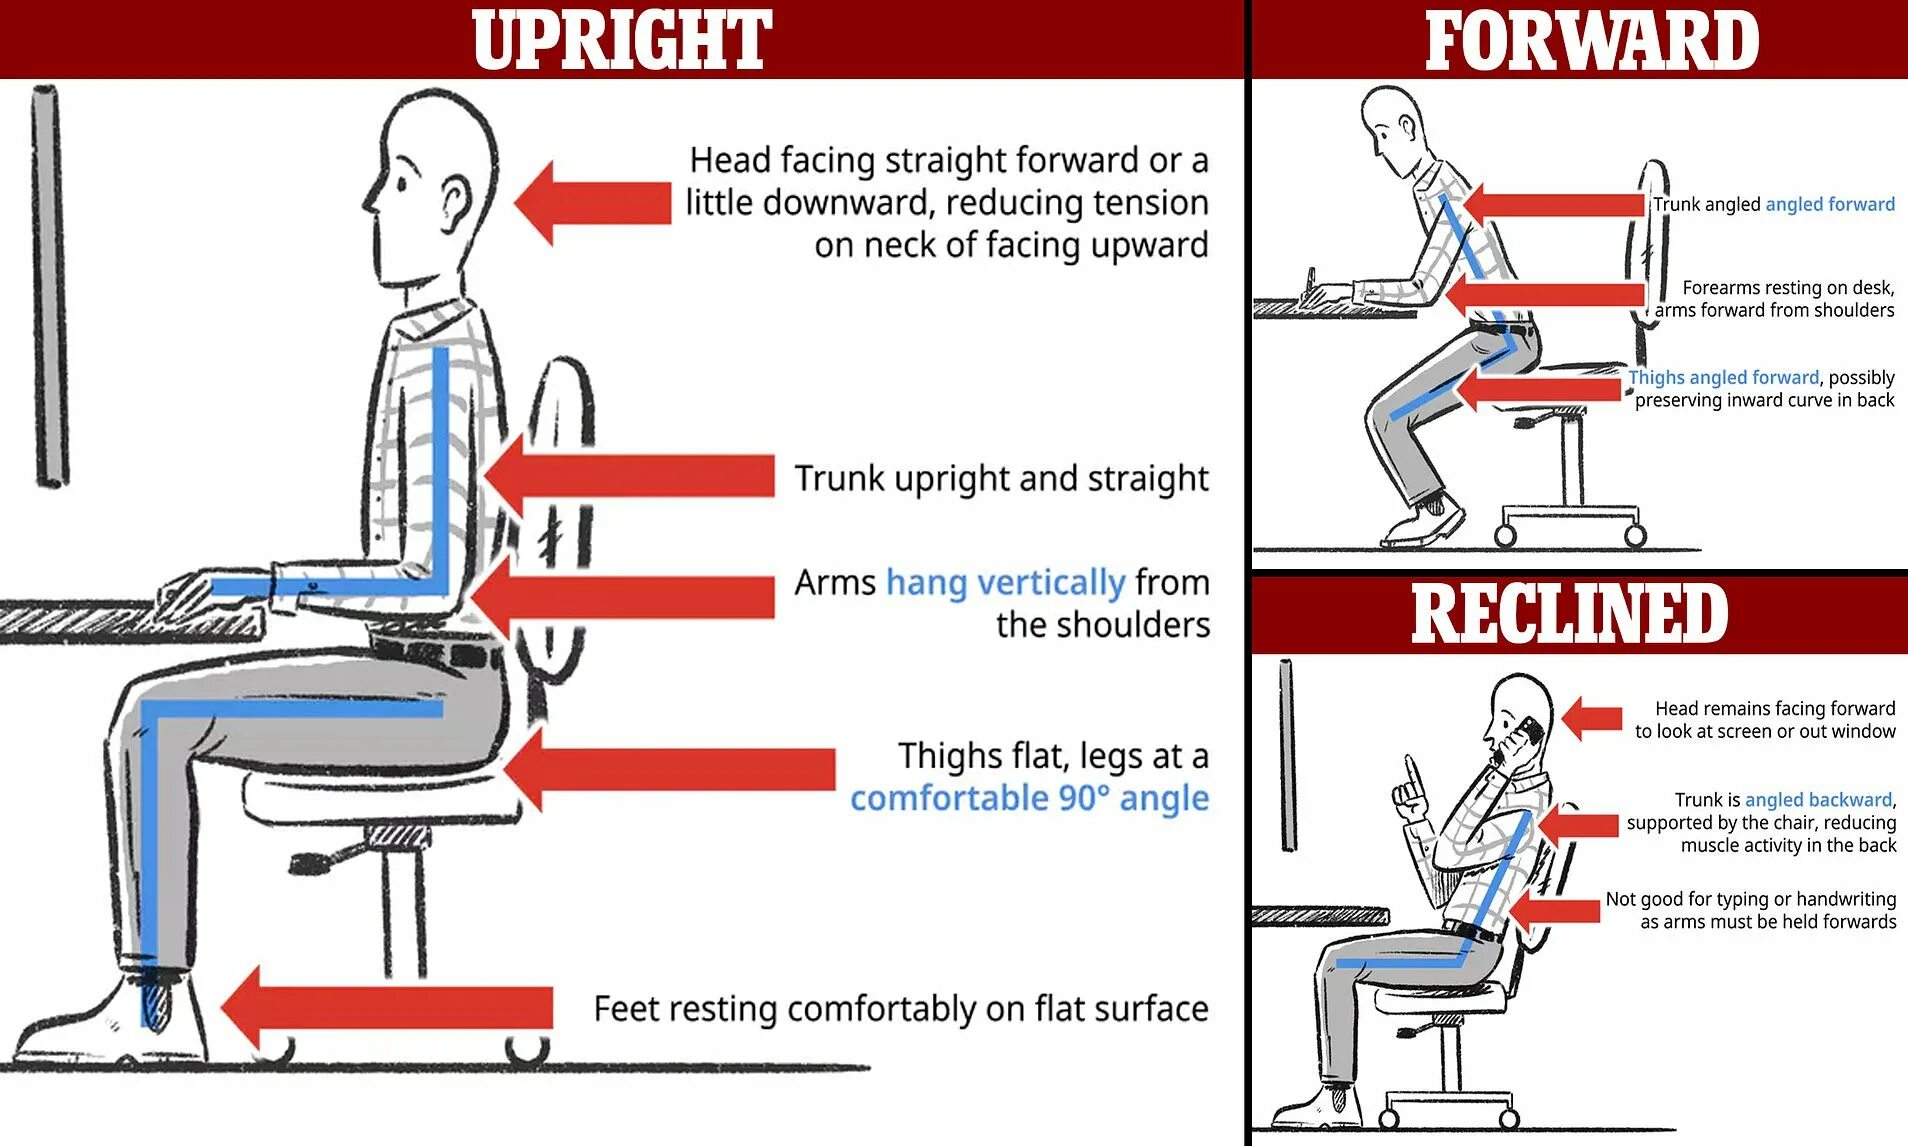 Ergonomic kneeling Computer posture Chair чертеж. How to sit on a Chair. Recline место. Sits on Gaming Chair.